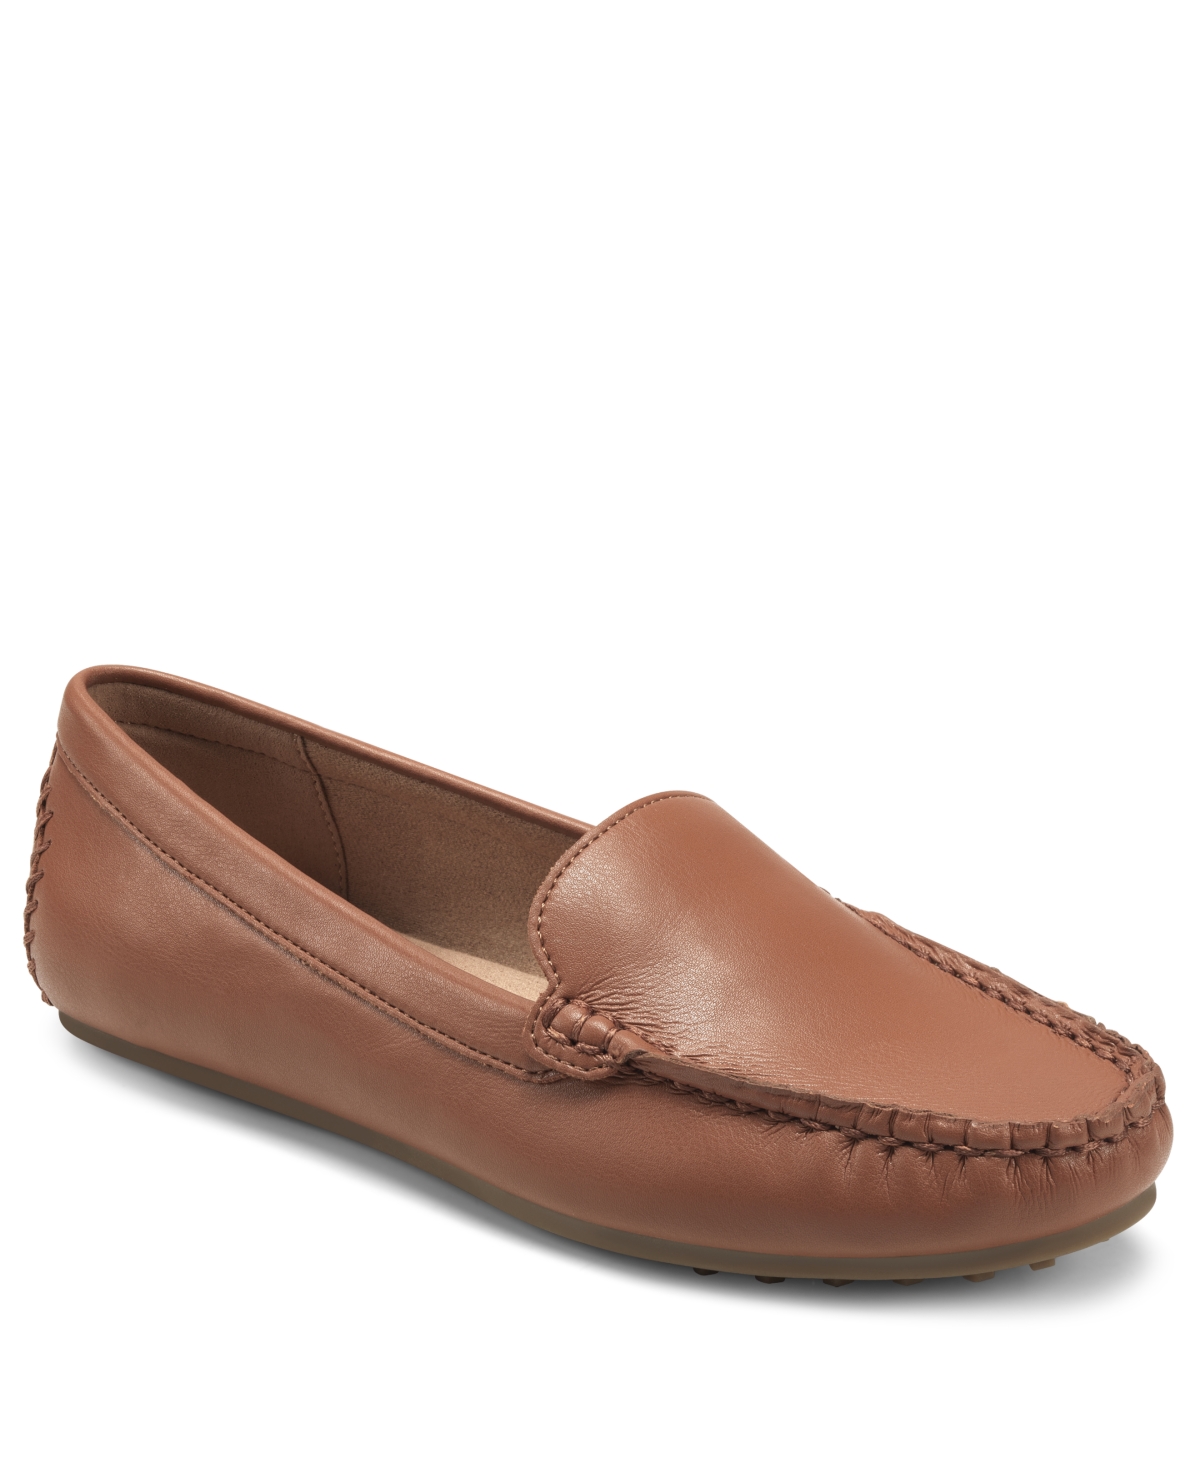 Aerosoles Women's Over Drive Driving Style Loafers Women's Shoes